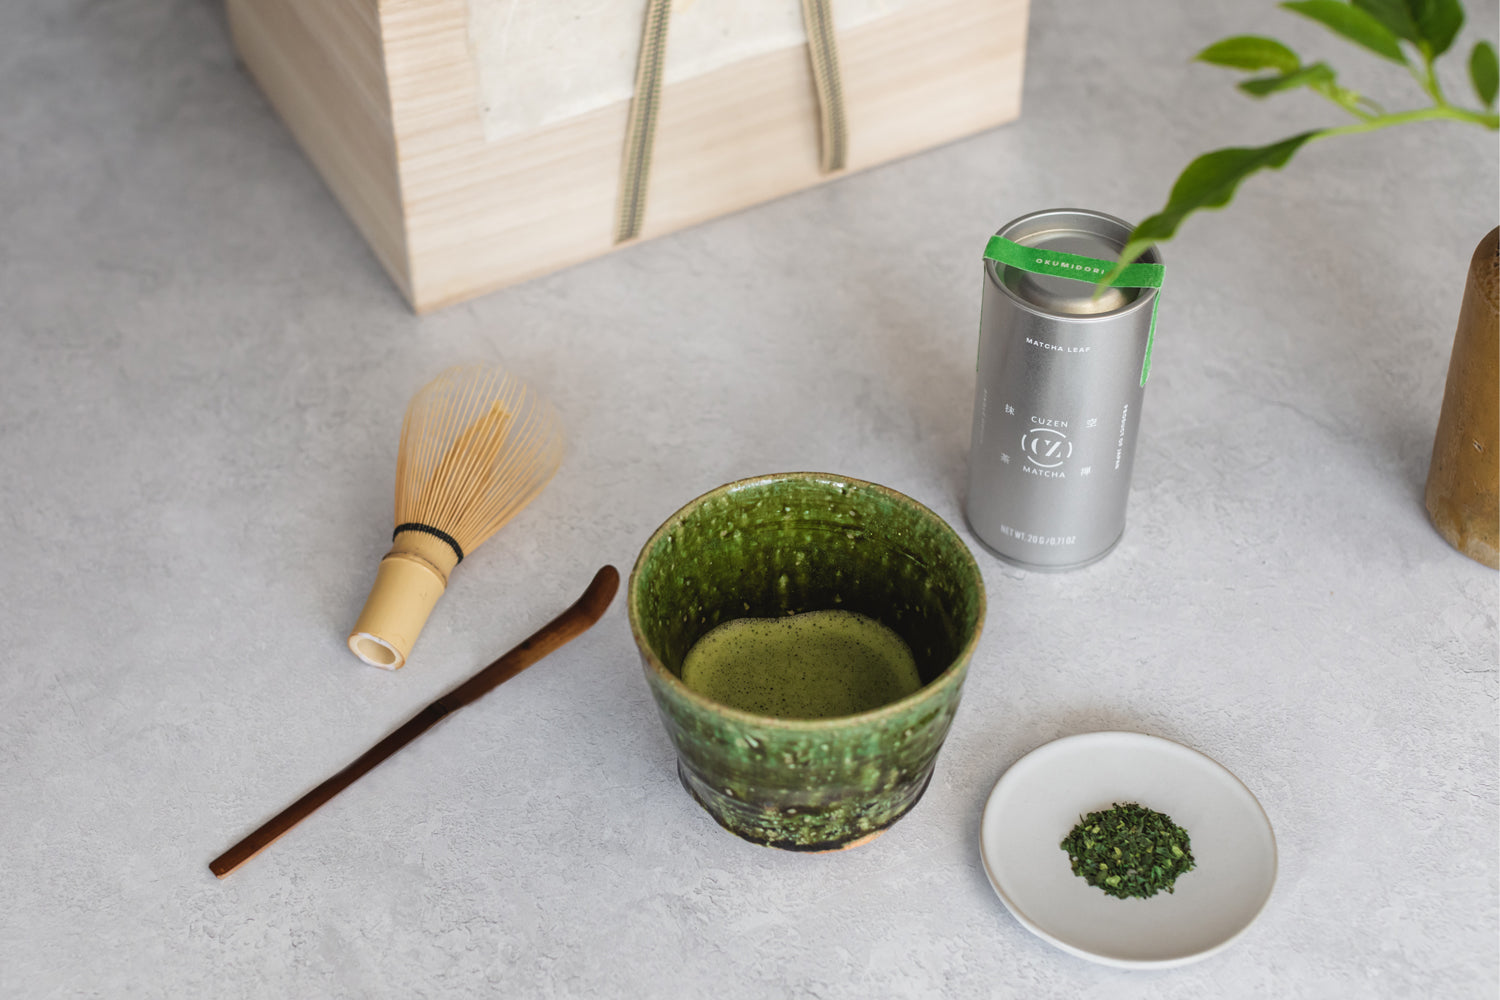 The Cuzen Ceremonial Set displayed on a table: Single Origin tea, a green matcha bowl, a bamboo whisk and a bamboo scoop.